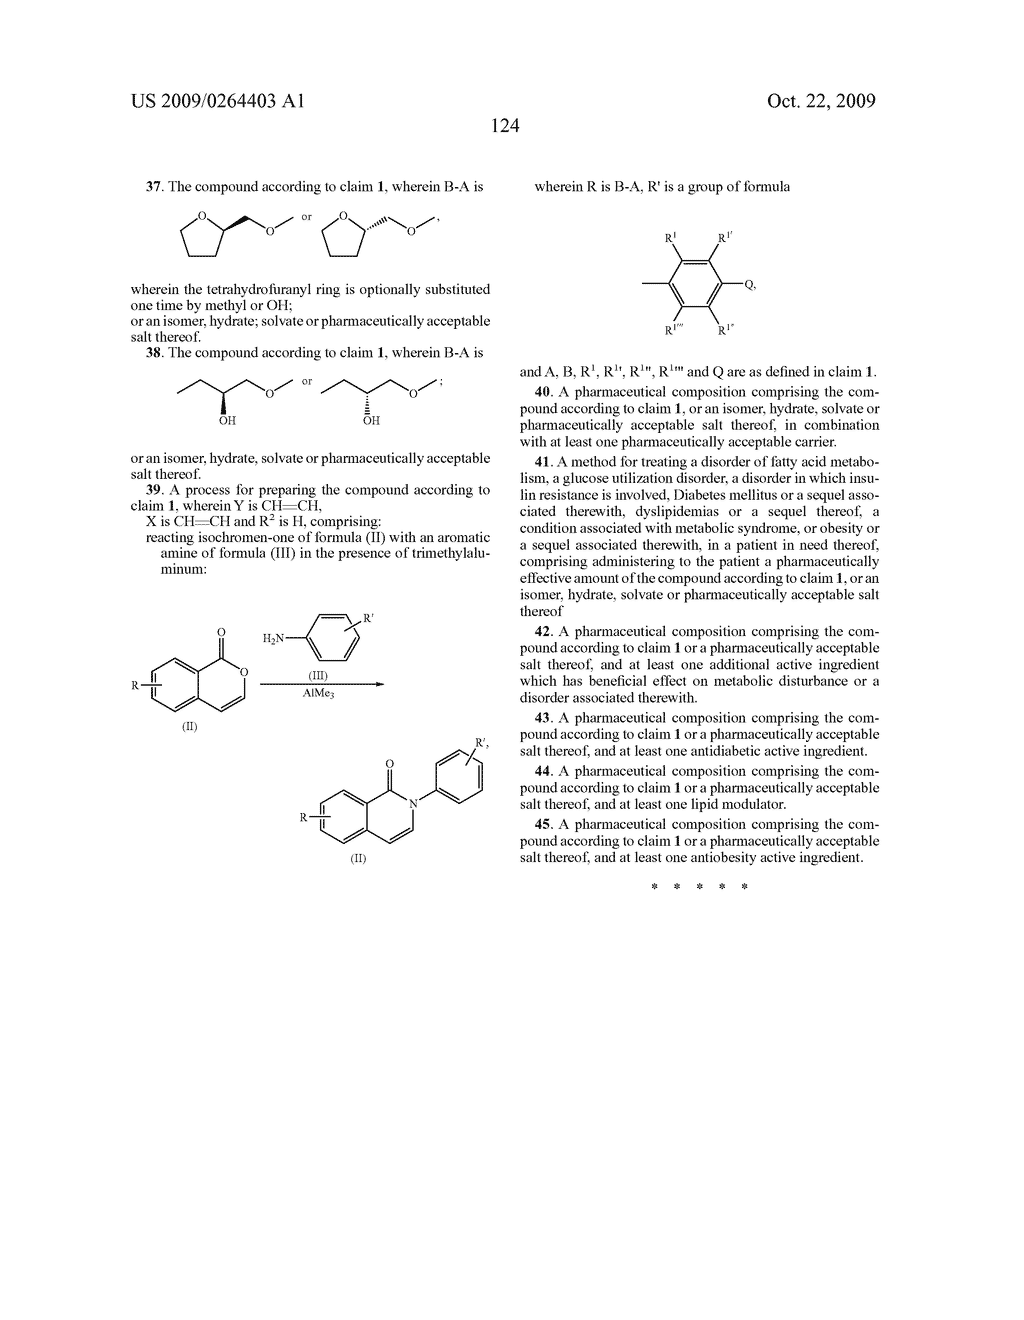 NOVEL AZACYCLYL-SUBSTITUTED ARYLDIHYDROISOQUINOLINONES, PROCESS FOR THEIR PREPARATION AND THEIR USE AS MEDICAMENTS - diagram, schematic, and image 125